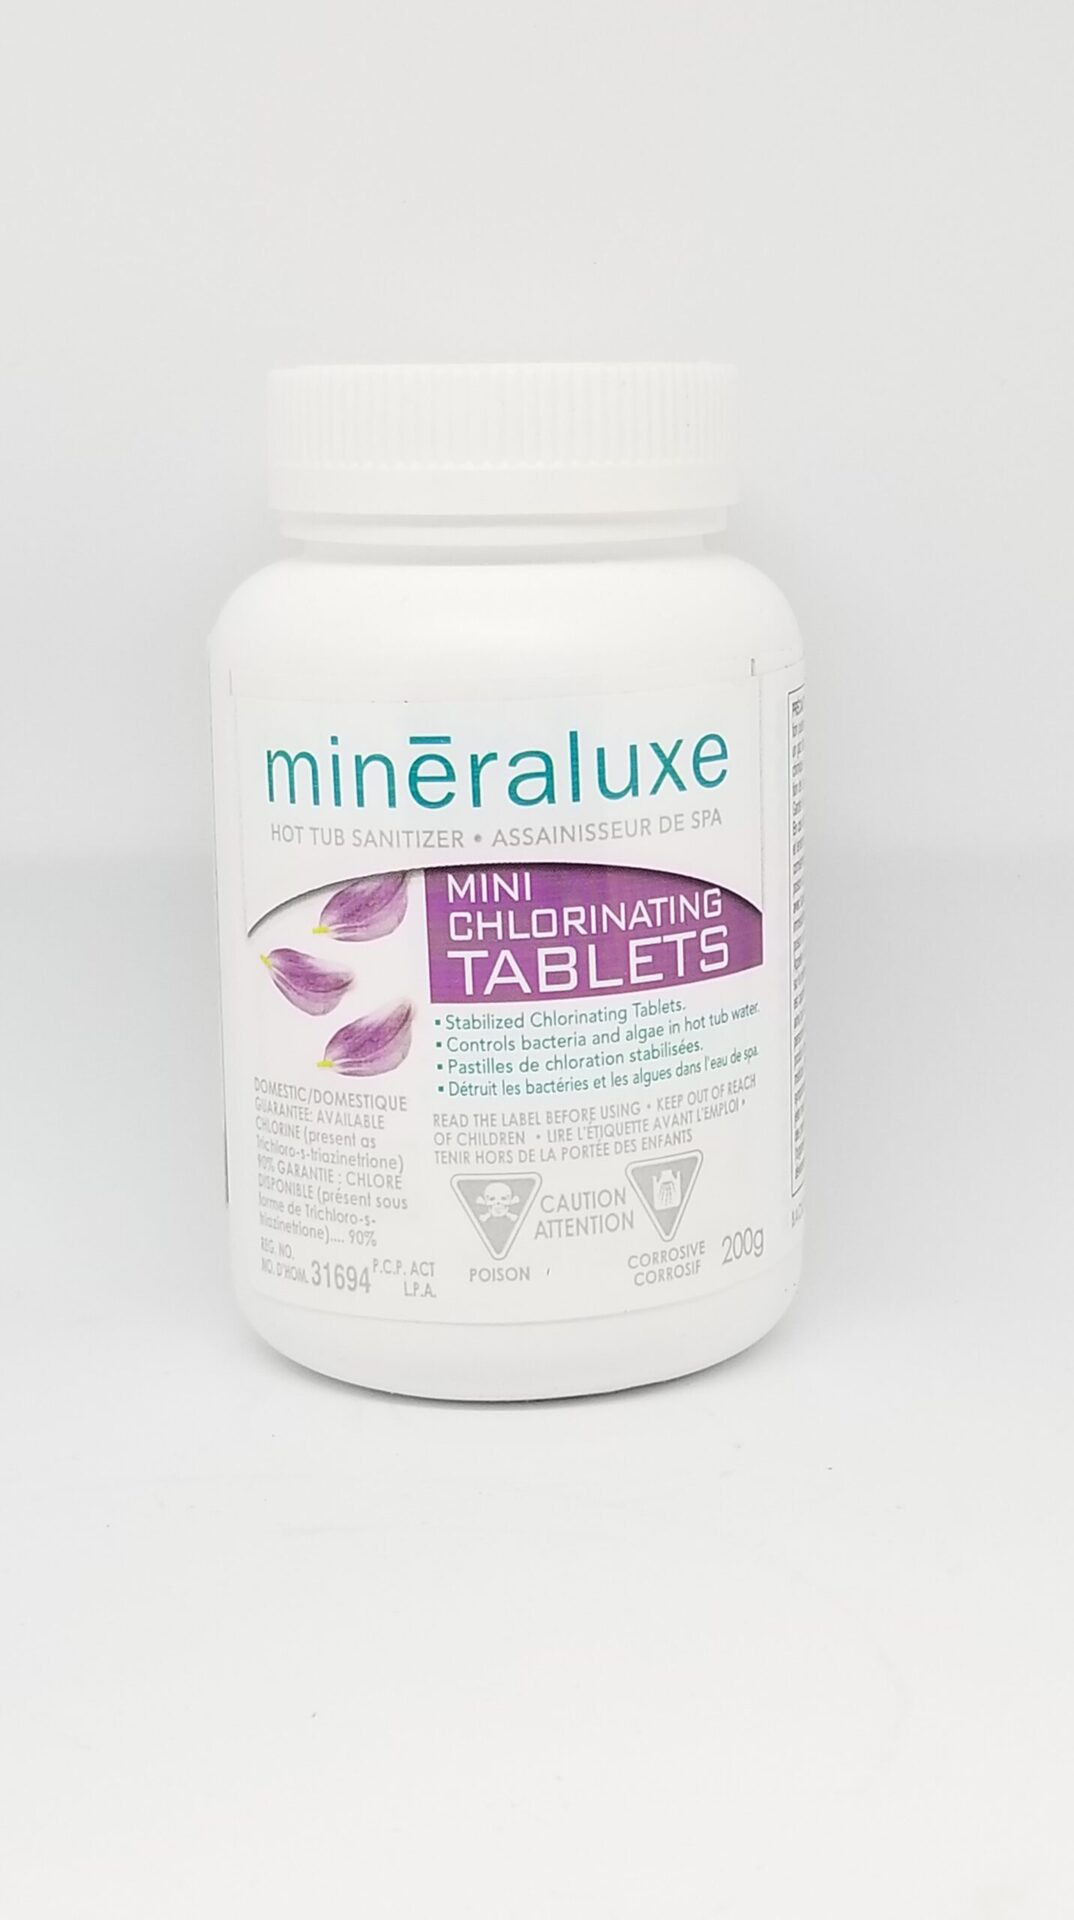 Mineraluxe Chlorinating Tablets 200g scaled - Mineraluxe Chlorinating Tablets 200g